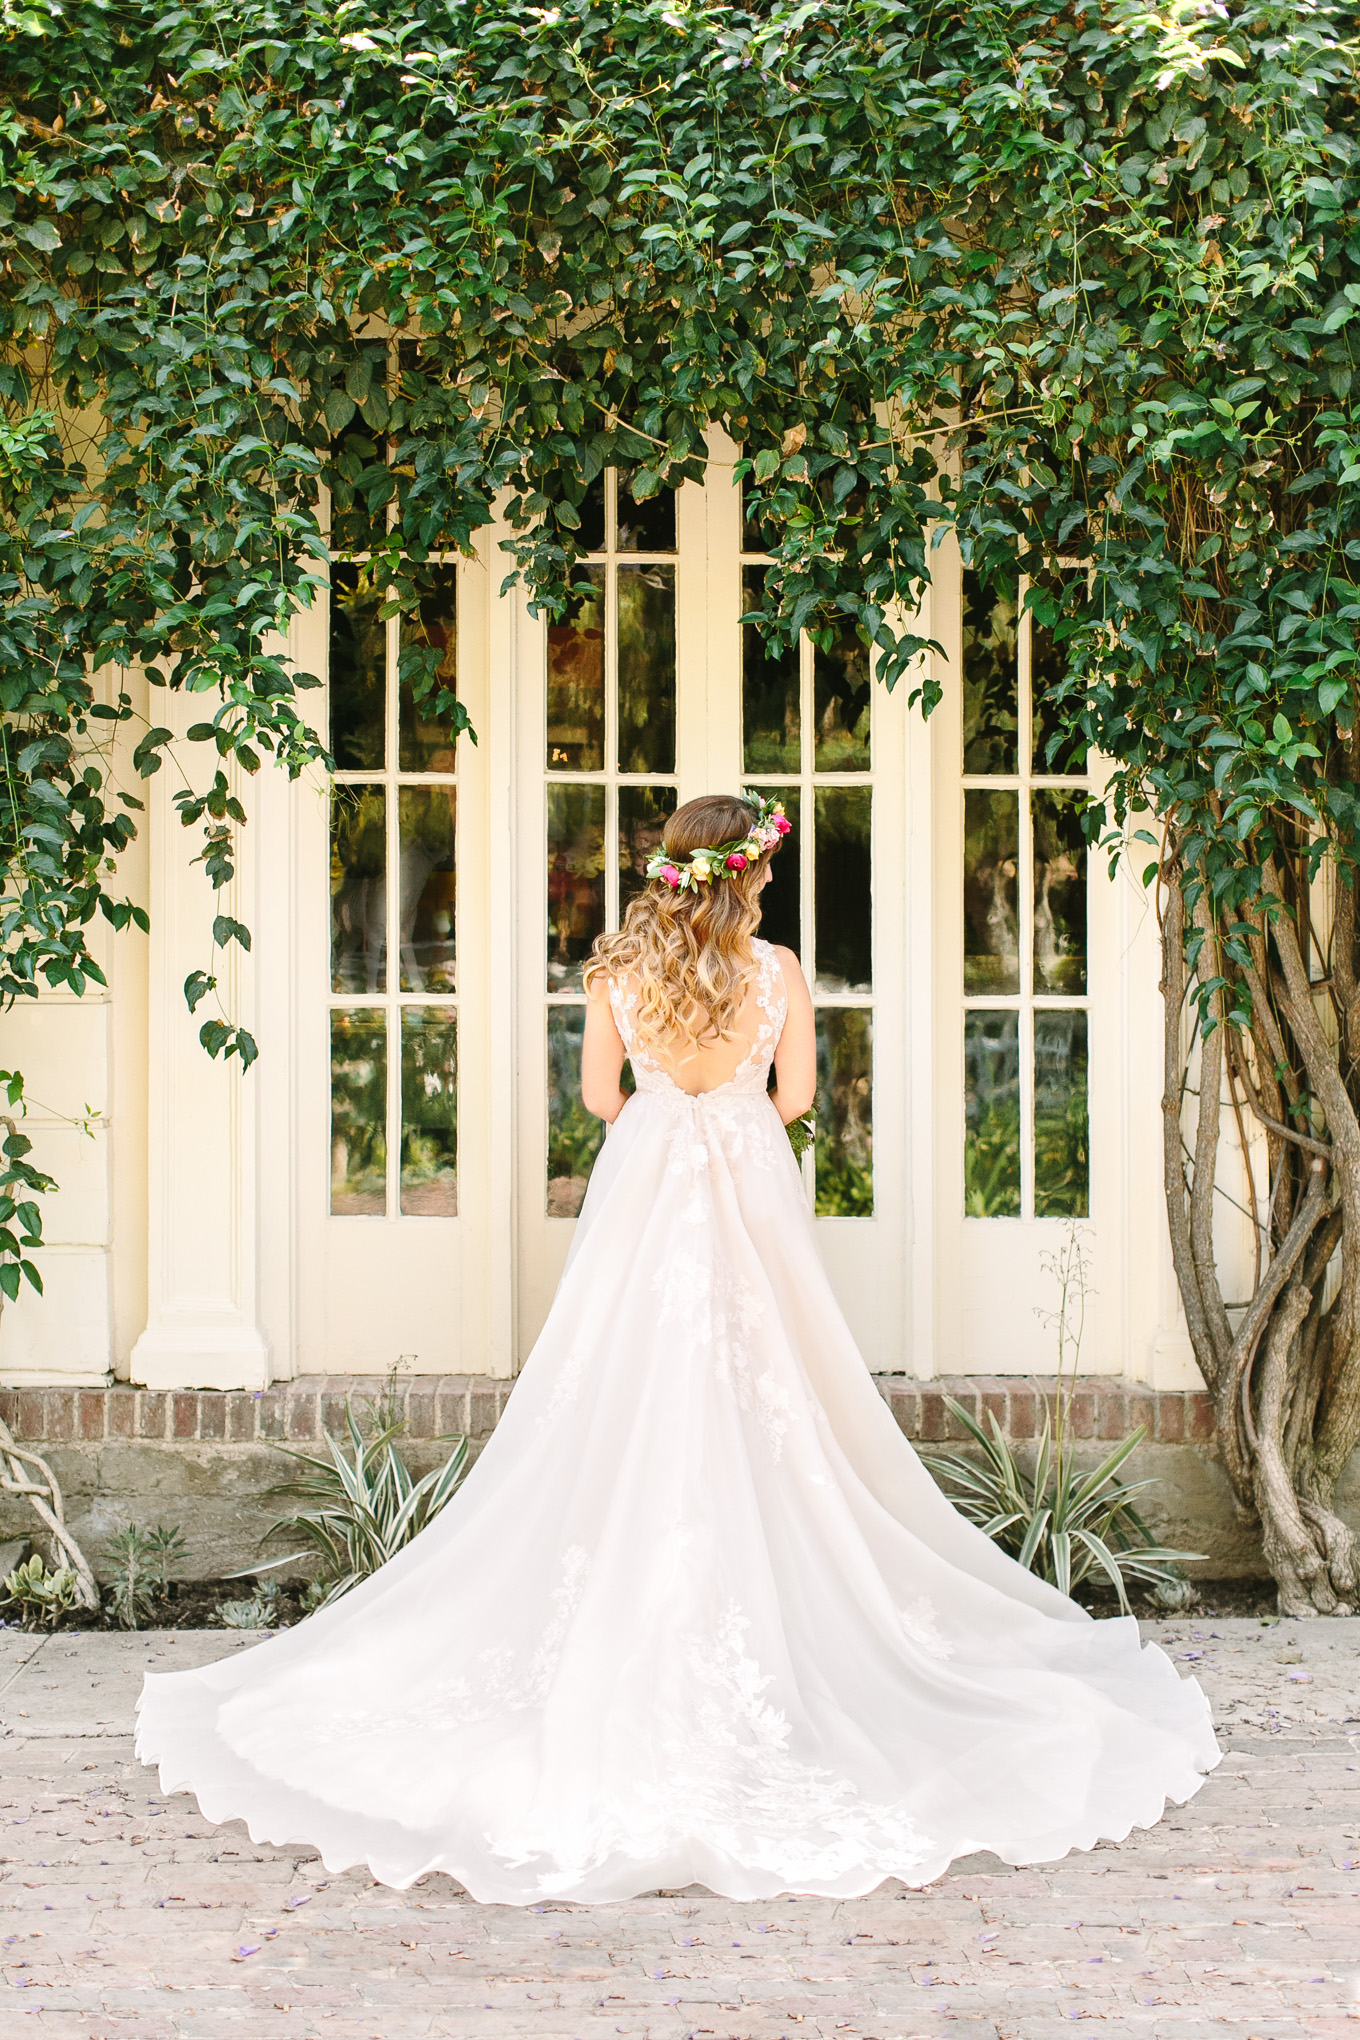 Bride in front of McCormick Home Ranch | Best Southern California Garden Wedding Venues | Colorful and elevated wedding photography for fun-loving couples | #gardenvenue #weddingvenue #socalweddingvenue #bouquetideas #uniquebouquet   Source: Mary Costa Photography | Los Angeles 